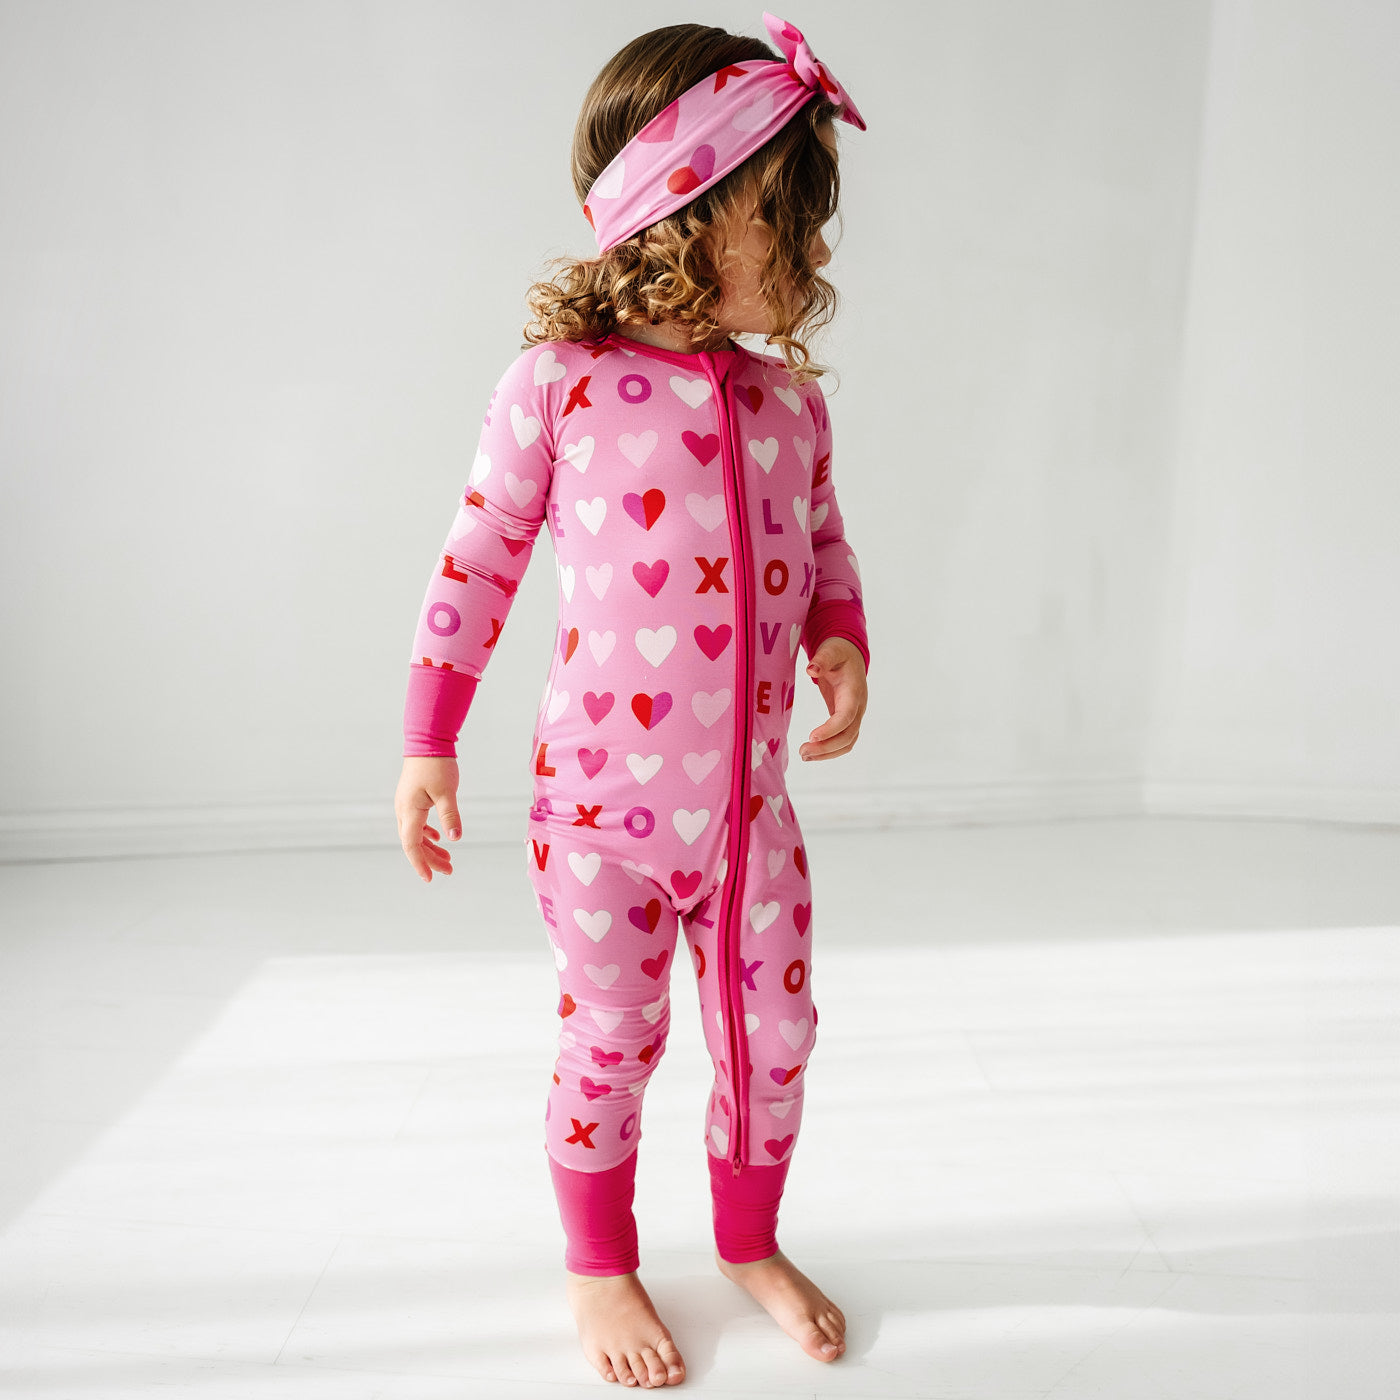 Child wearing a Pink XOXO zippy paired with a matching luxe bow headband